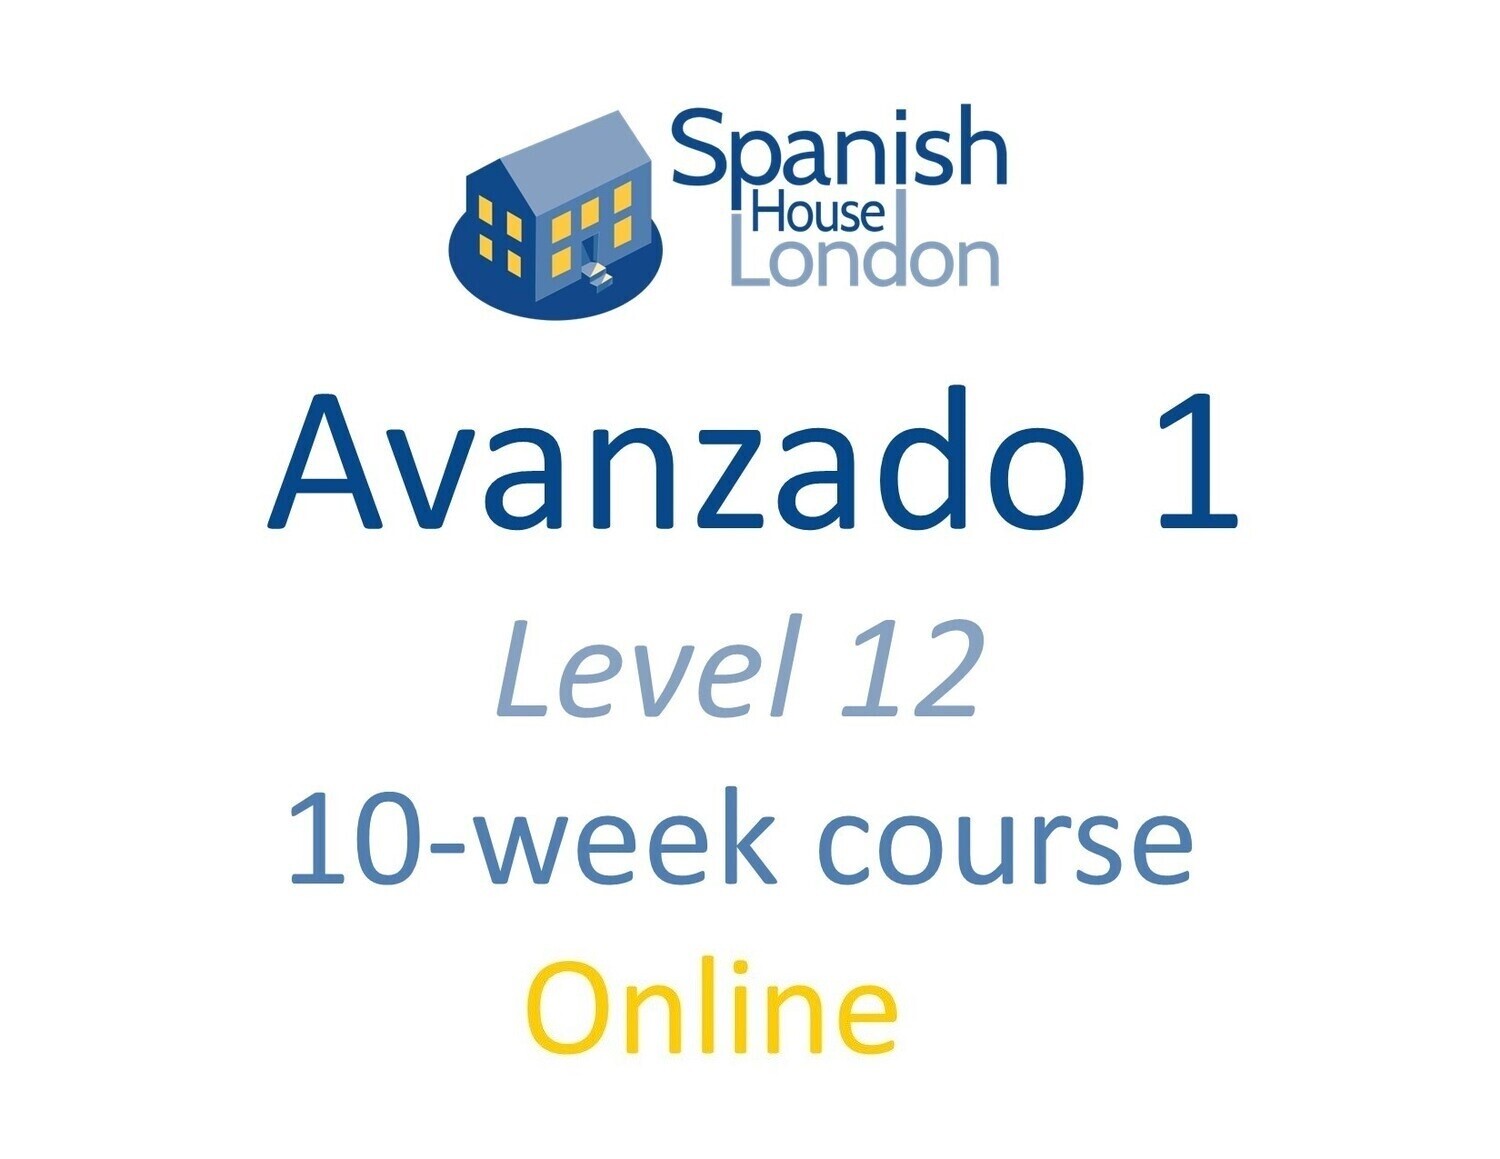 Avanzado 1 Course starting on 29th April at 6pm Online